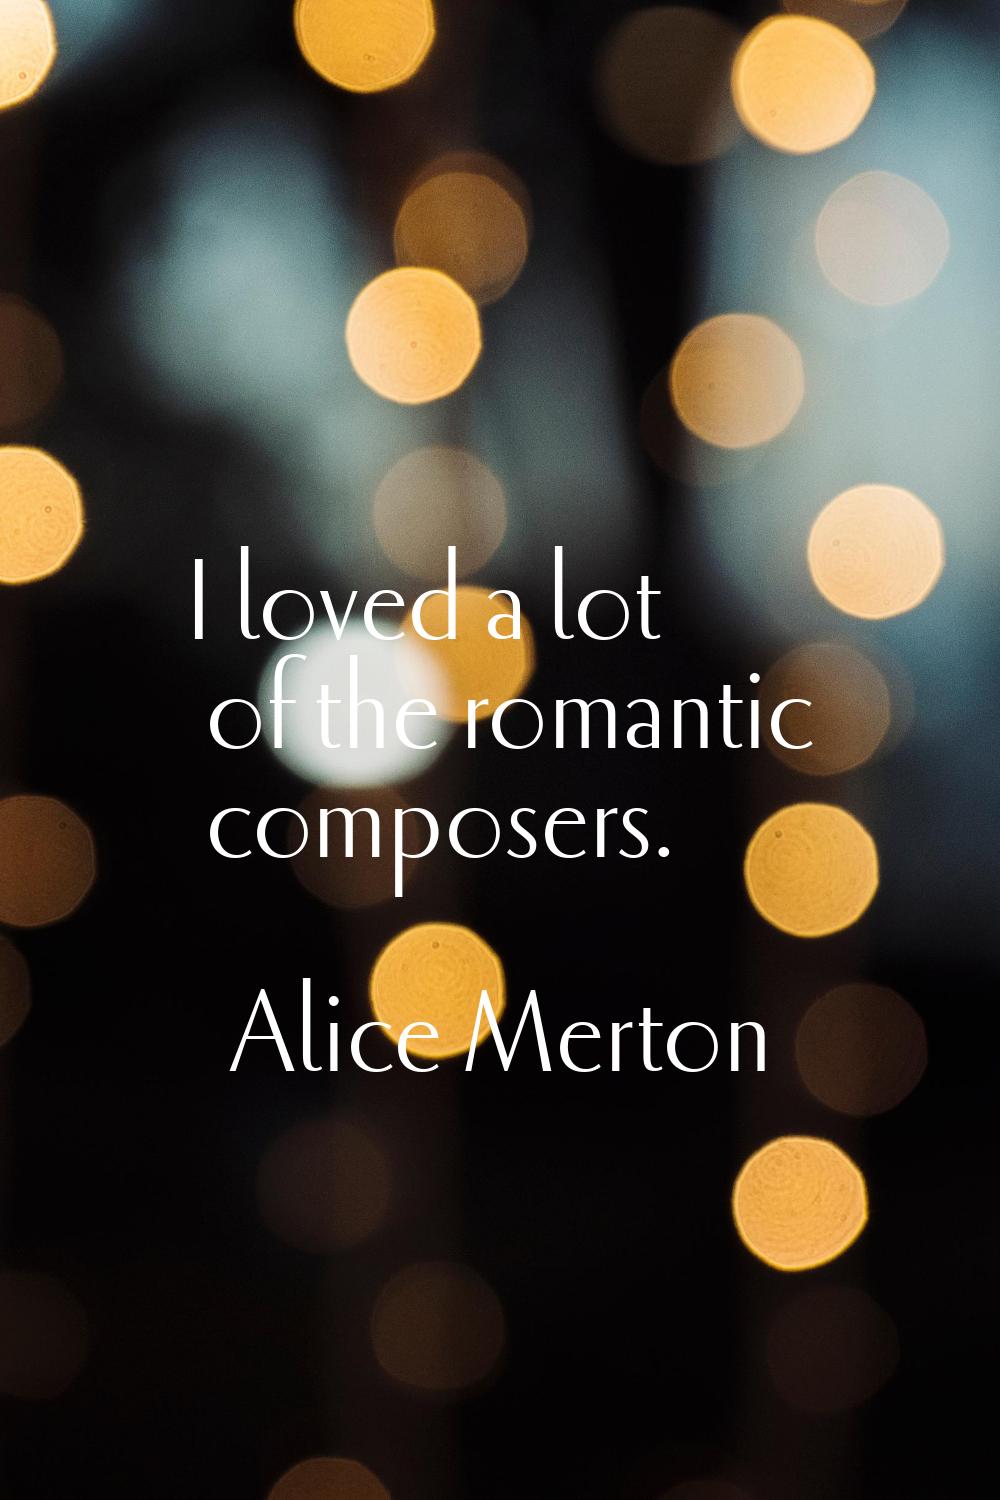 I loved a lot of the romantic composers.